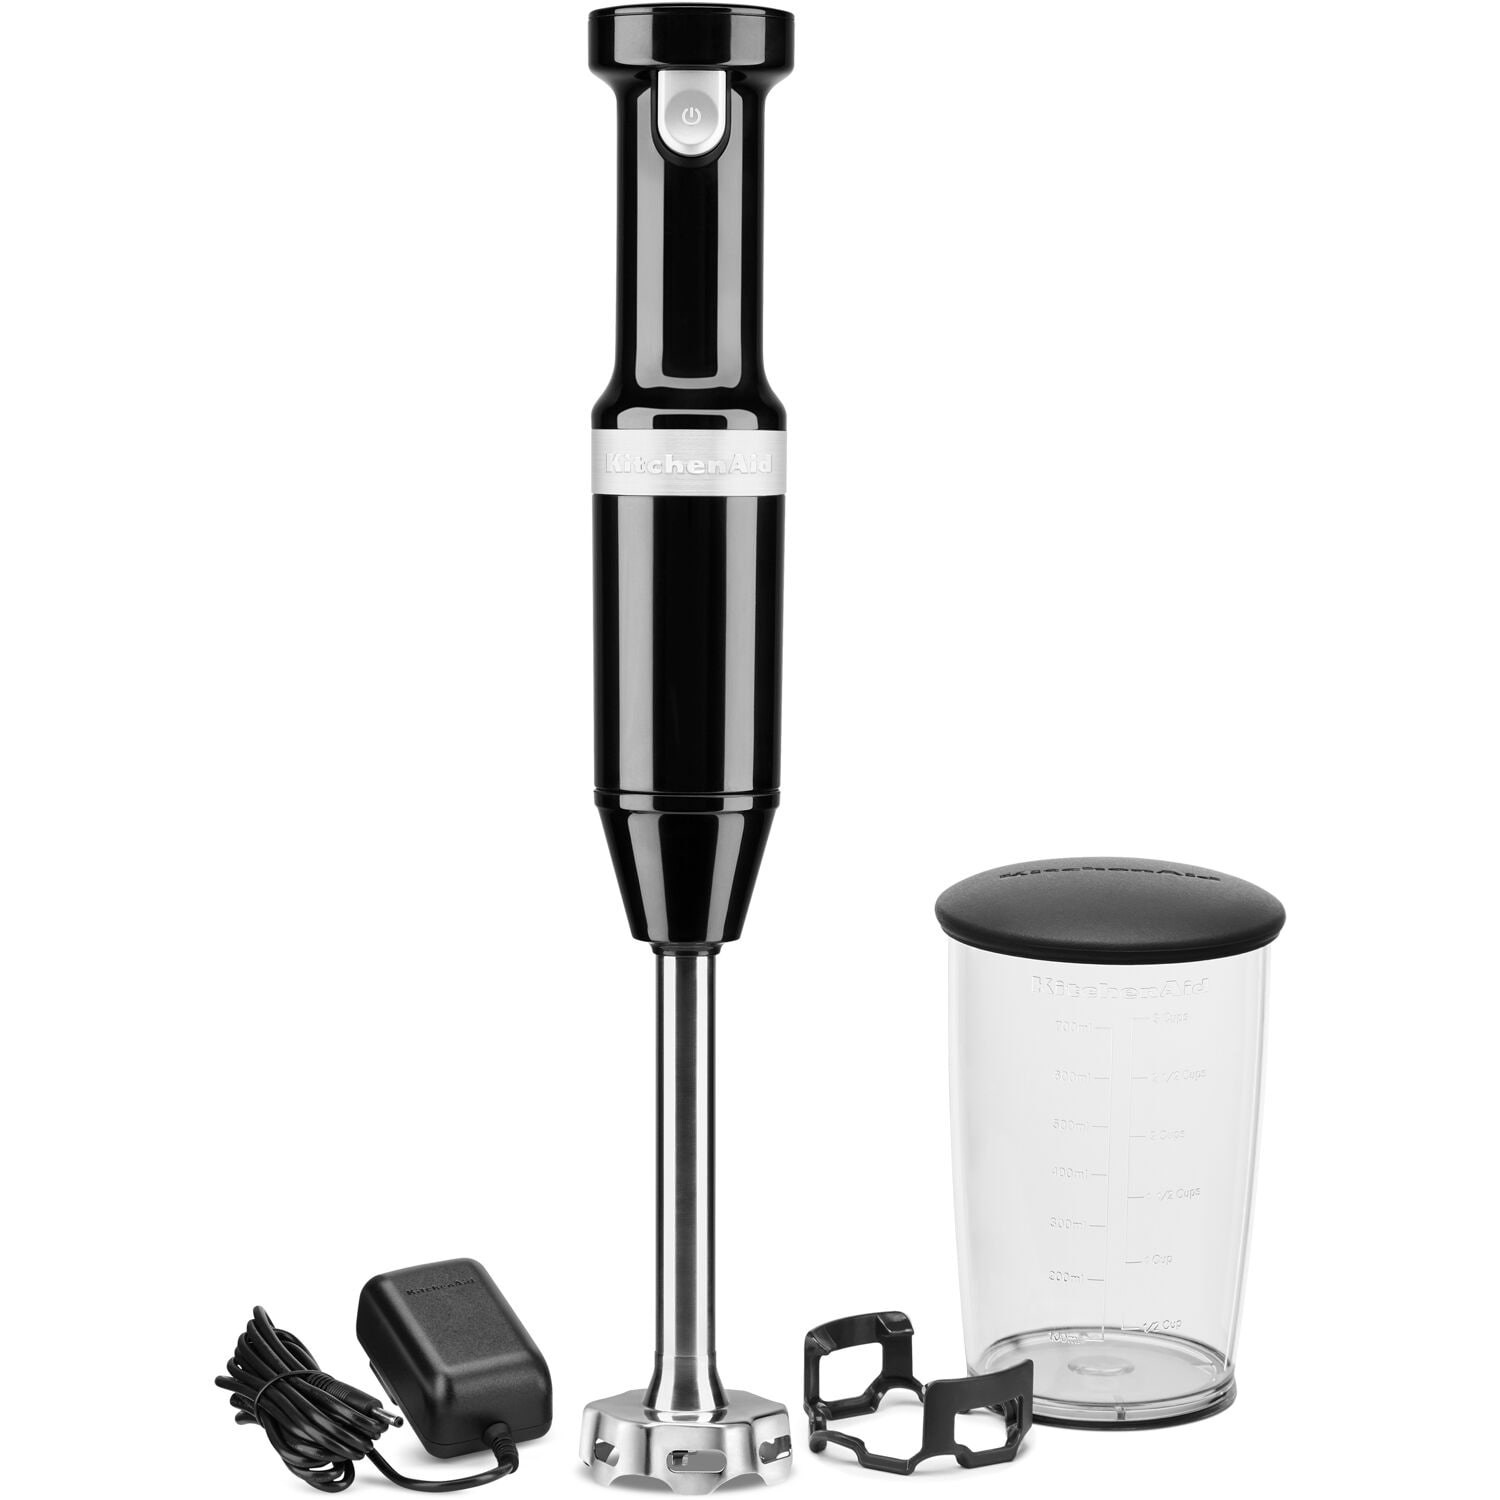 Cuisinart SmartStick 2-Speed Brushed Chrome 200-Watt Immersion Blender with  Accessory Jar at